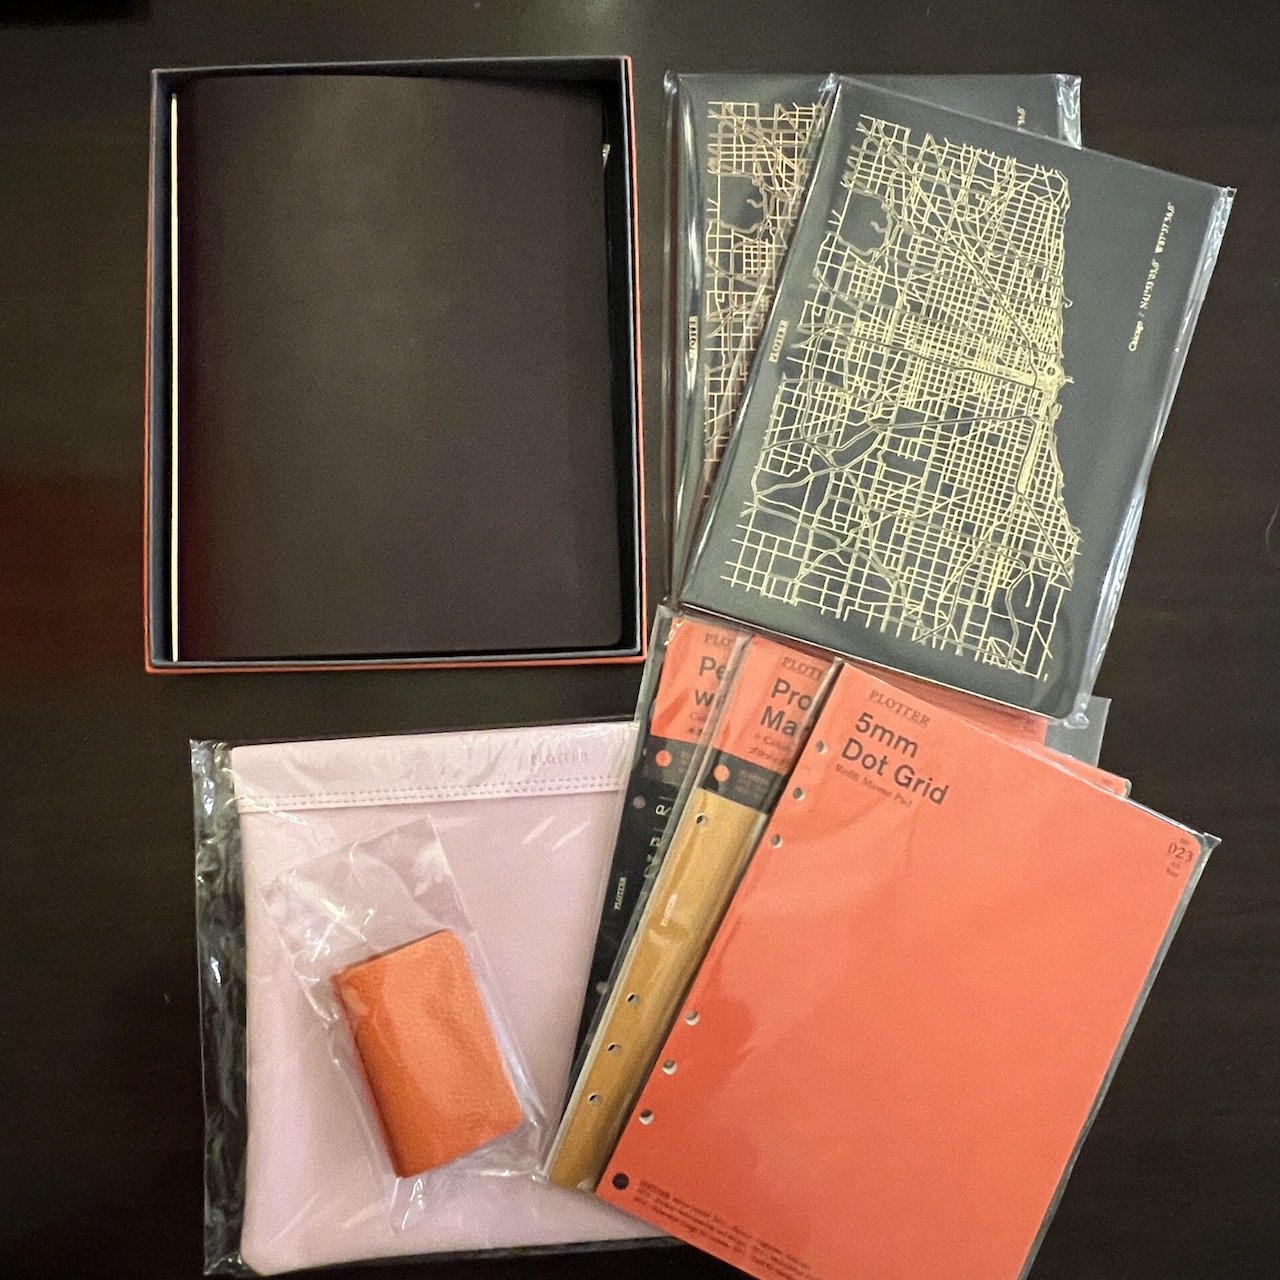 Viking Collector's Pencil Boxed Set Review — The Pen Addict